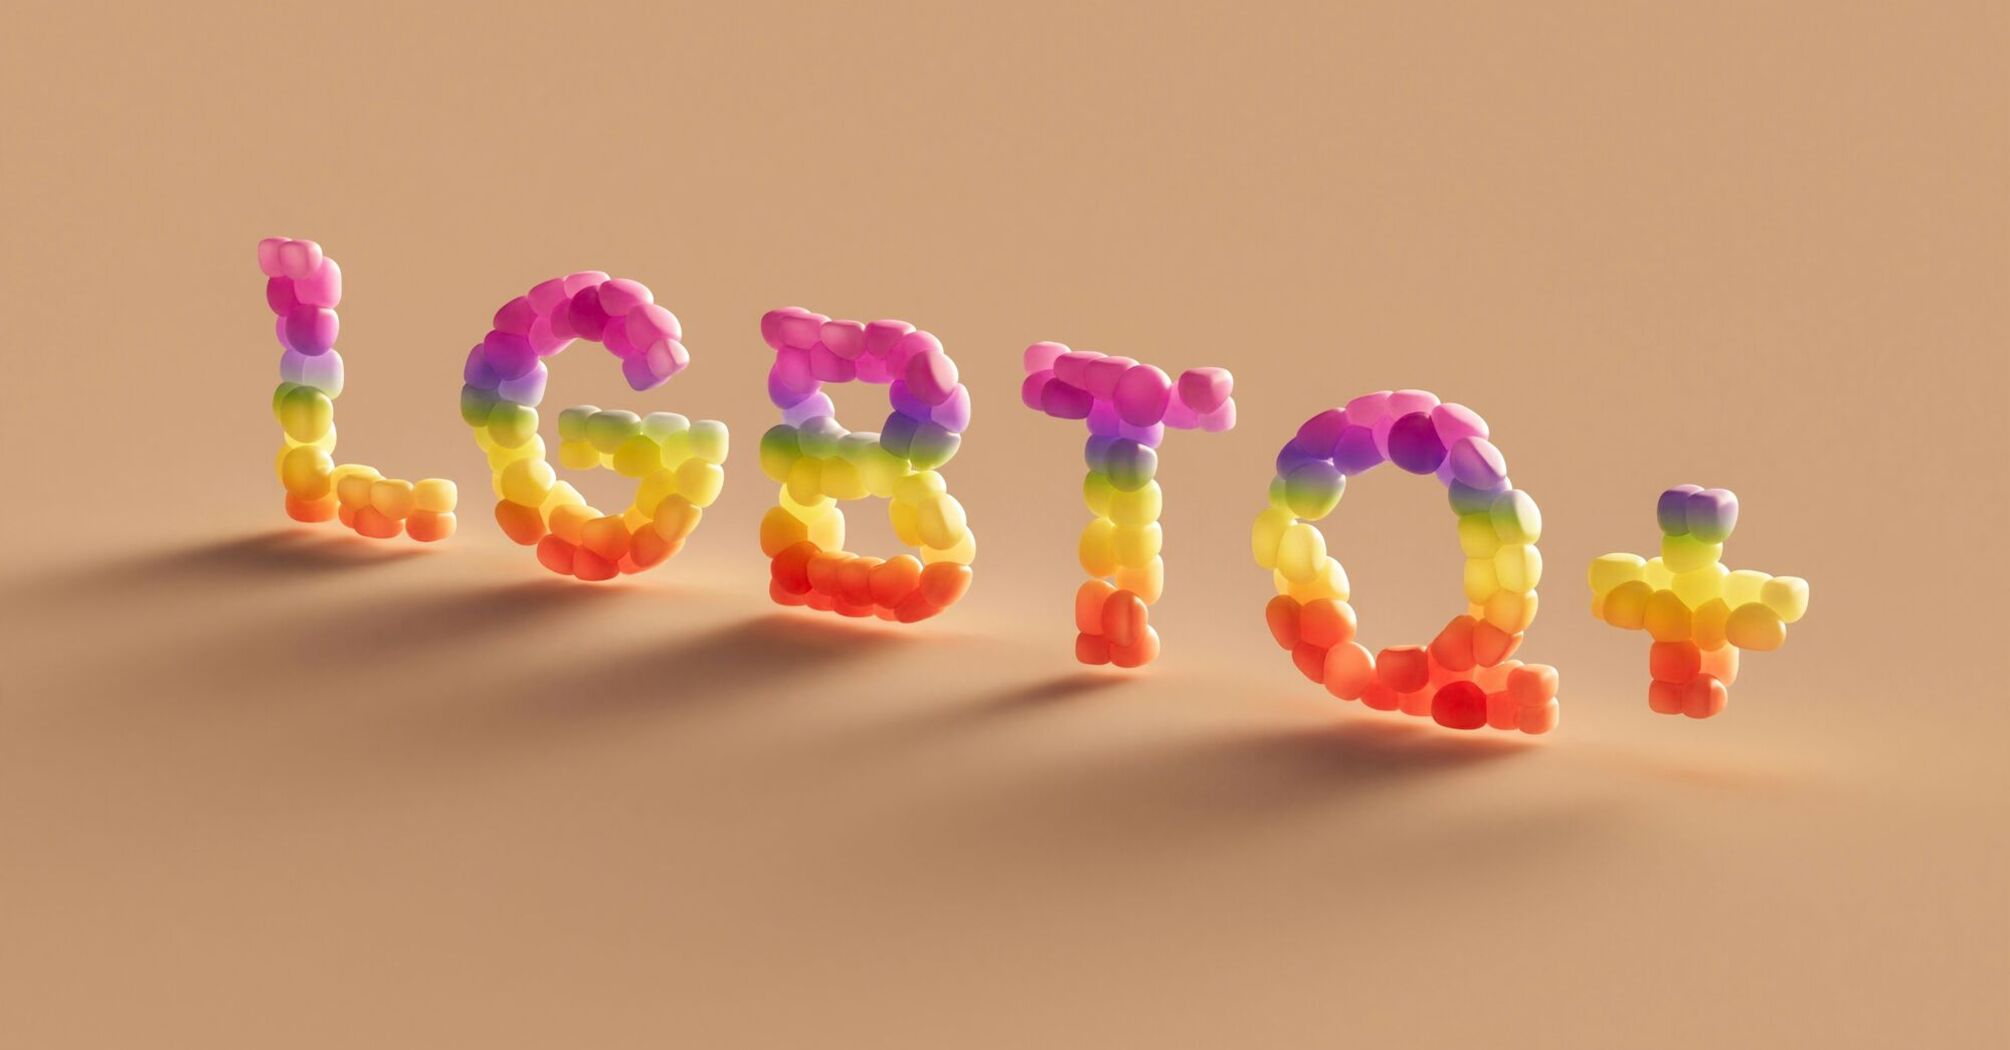 The word 'LGBTQ+' spelled out in colorful balloon-like letters on a pastel background